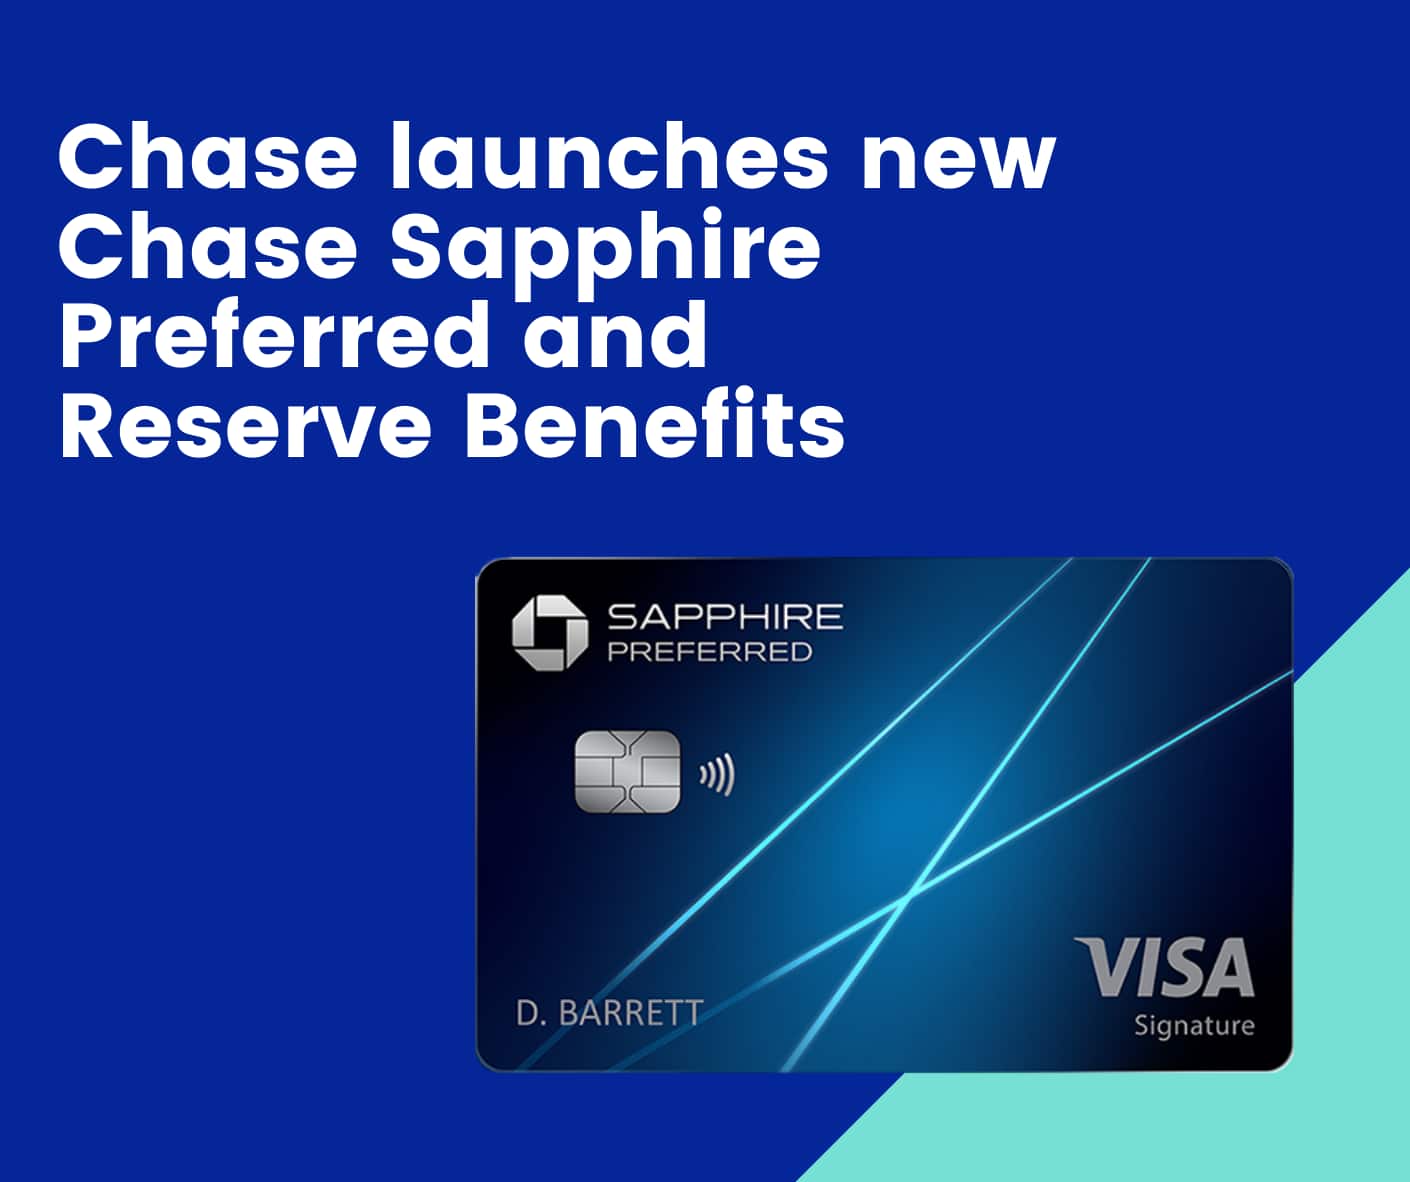 Chase announces new sapphire benefits